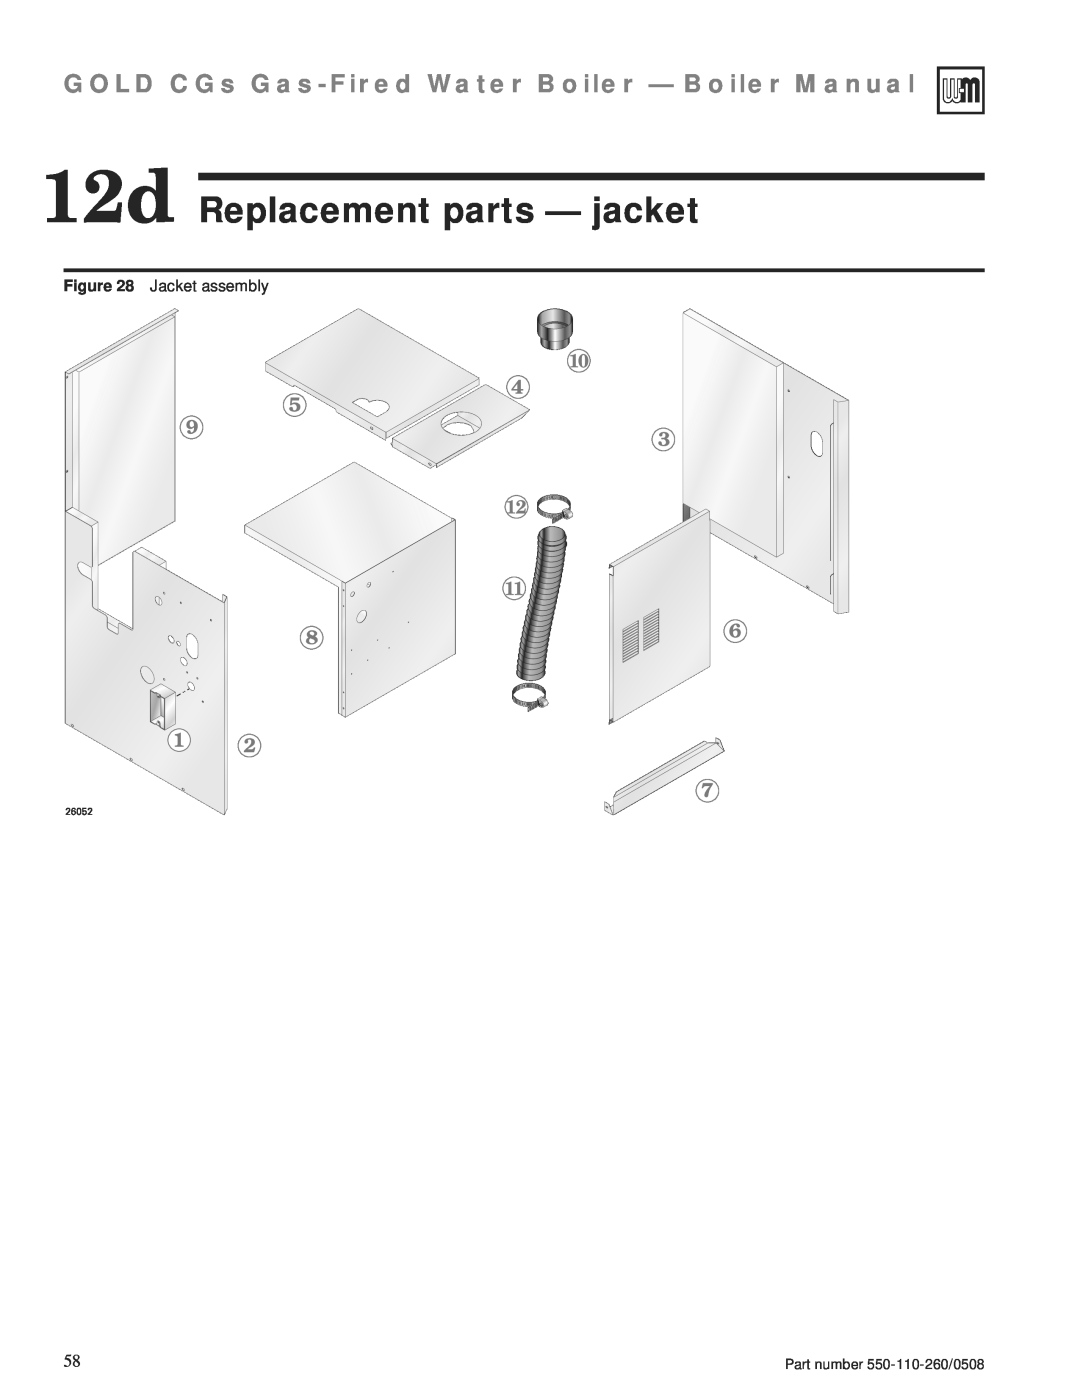 Weil-McLain 550-110-260/0508 manual 12d Replacement parts — jacket, GOLD CGs Gas-FiredWater Boiler — Boiler Manual 